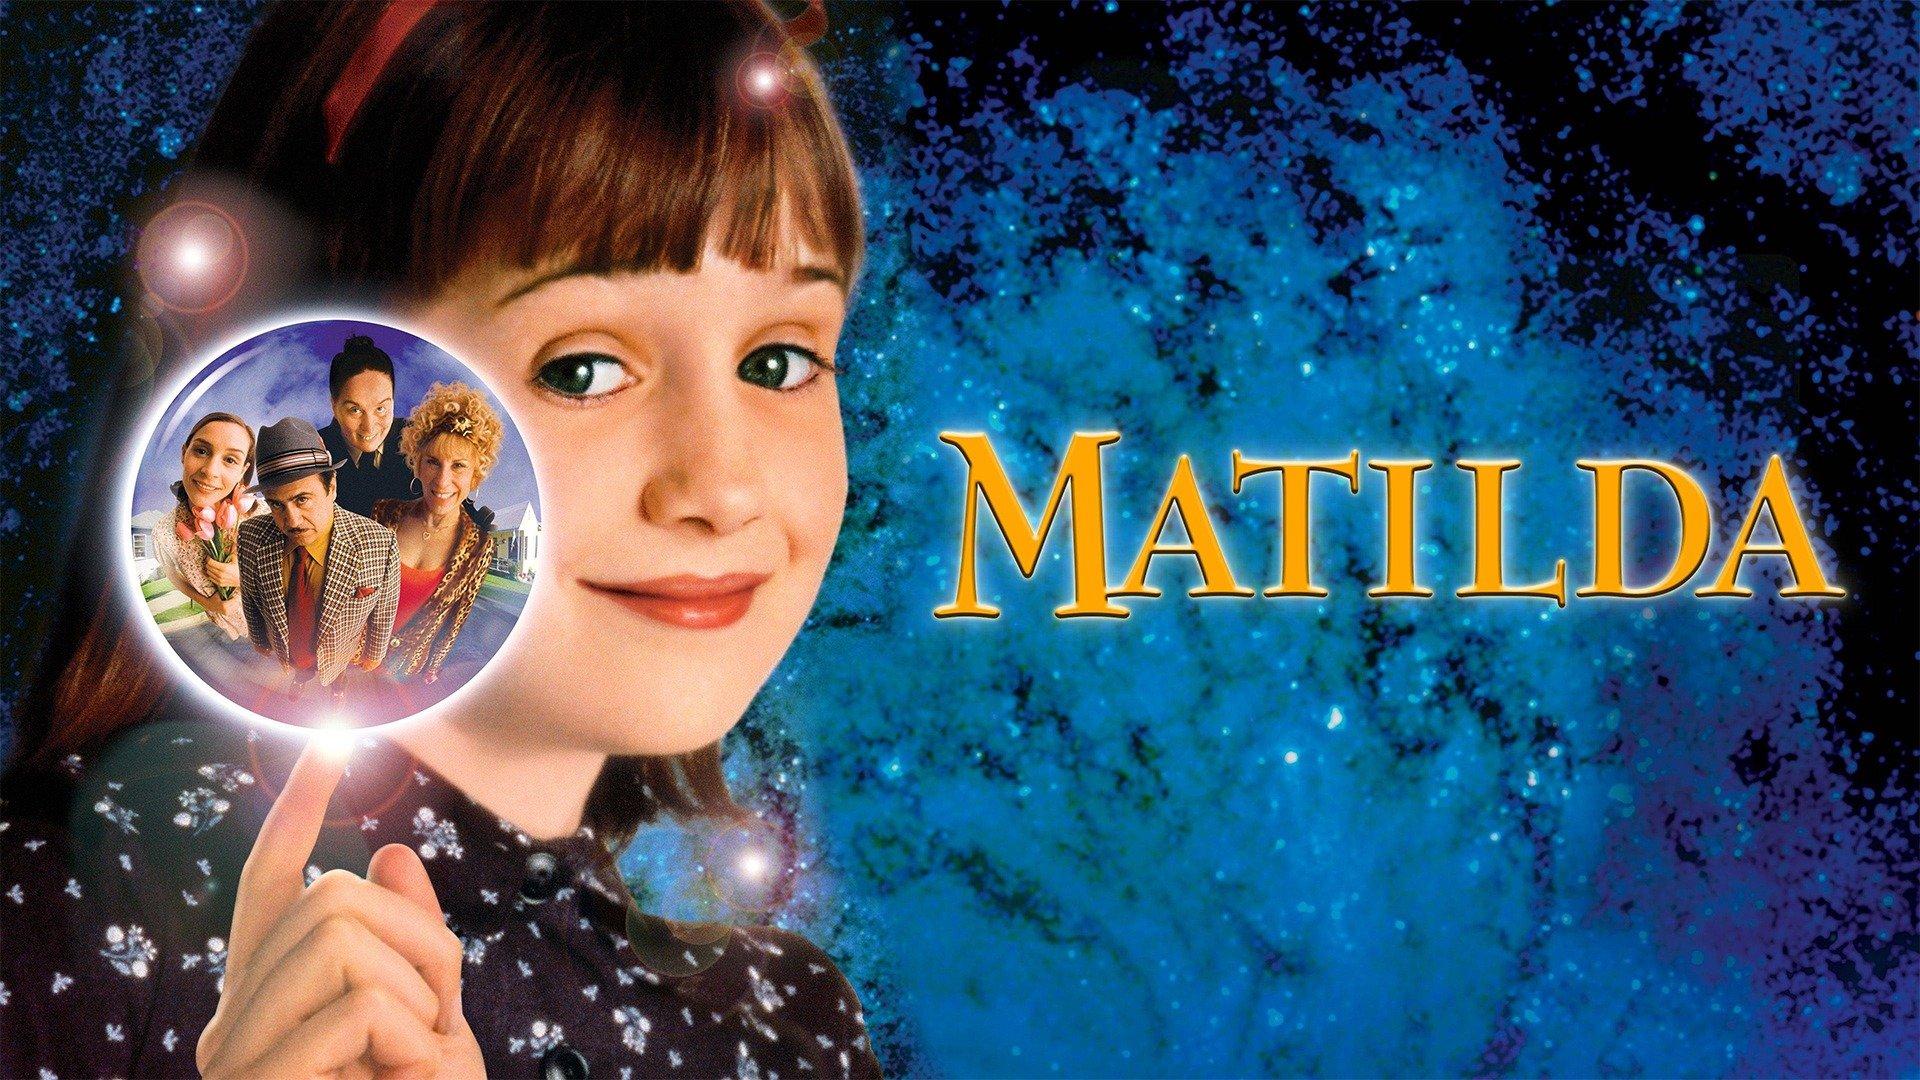 Matilda Streaming Online on Philo Trial)